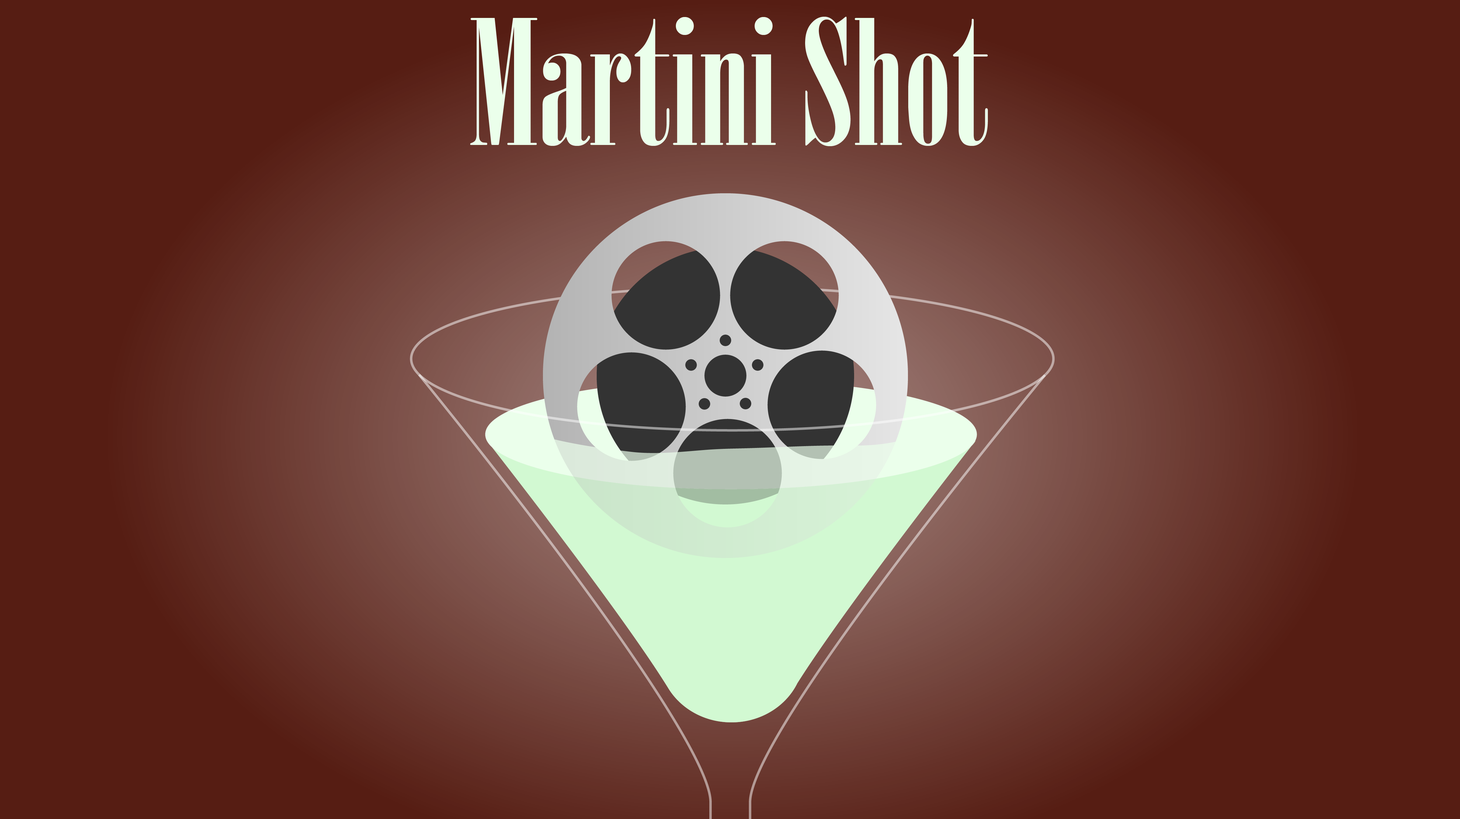 This is Rob Long, and on today’s Martini Shot I use a very grim battlefield metaphor to describe the new Best Popular Movie Oscar award, coming in 2019. It’s a little dark, but then so is the entertainment business.